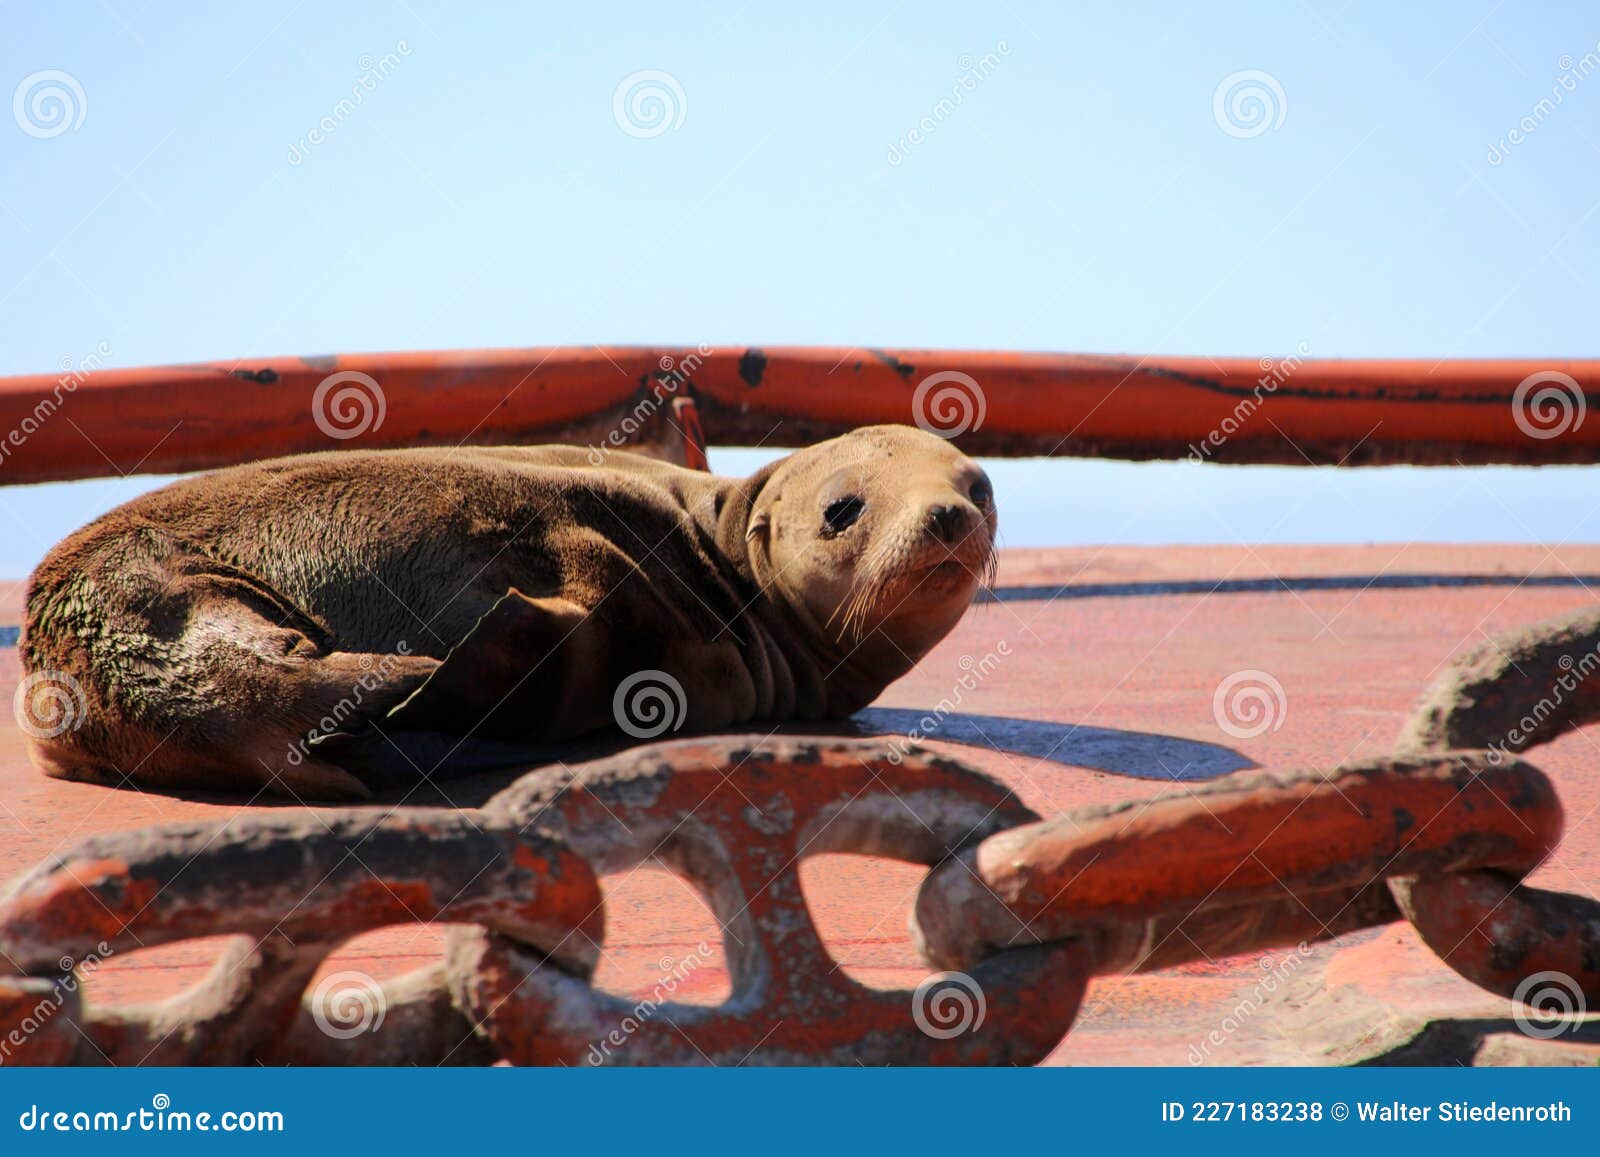 young sea lion sunbathes on a buoy